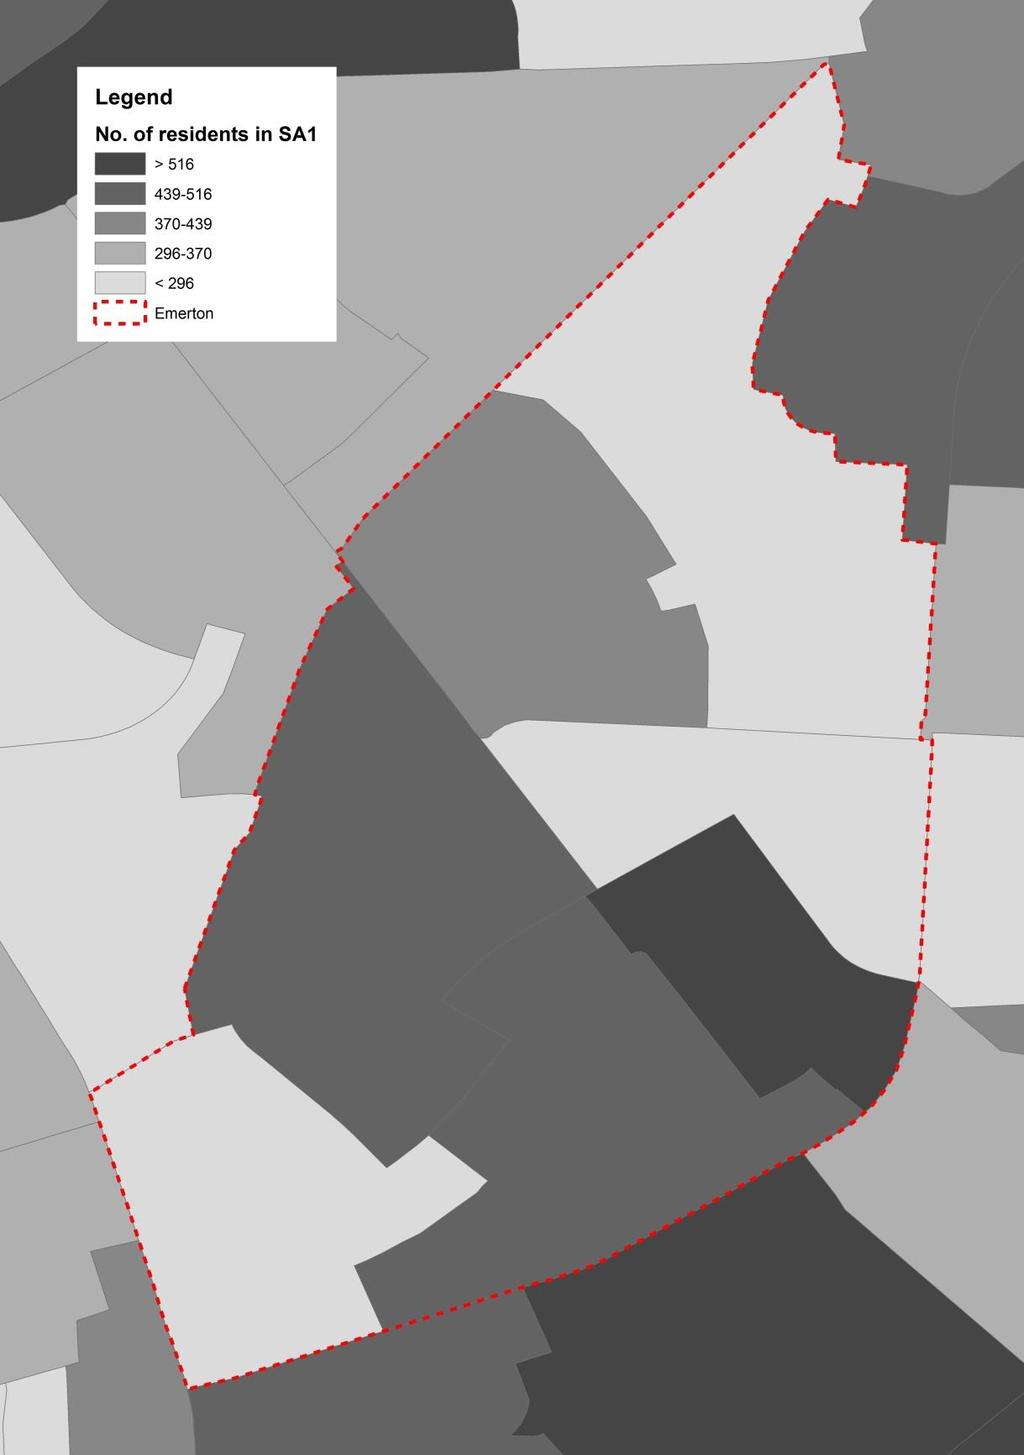 Community profile in detail Figure A4: Population distribution, Emerton SSC, 2011 Source: ABS 2011 Census, TableBuilder Pro Emerton is generally of relatively low density, with half of the SA1s